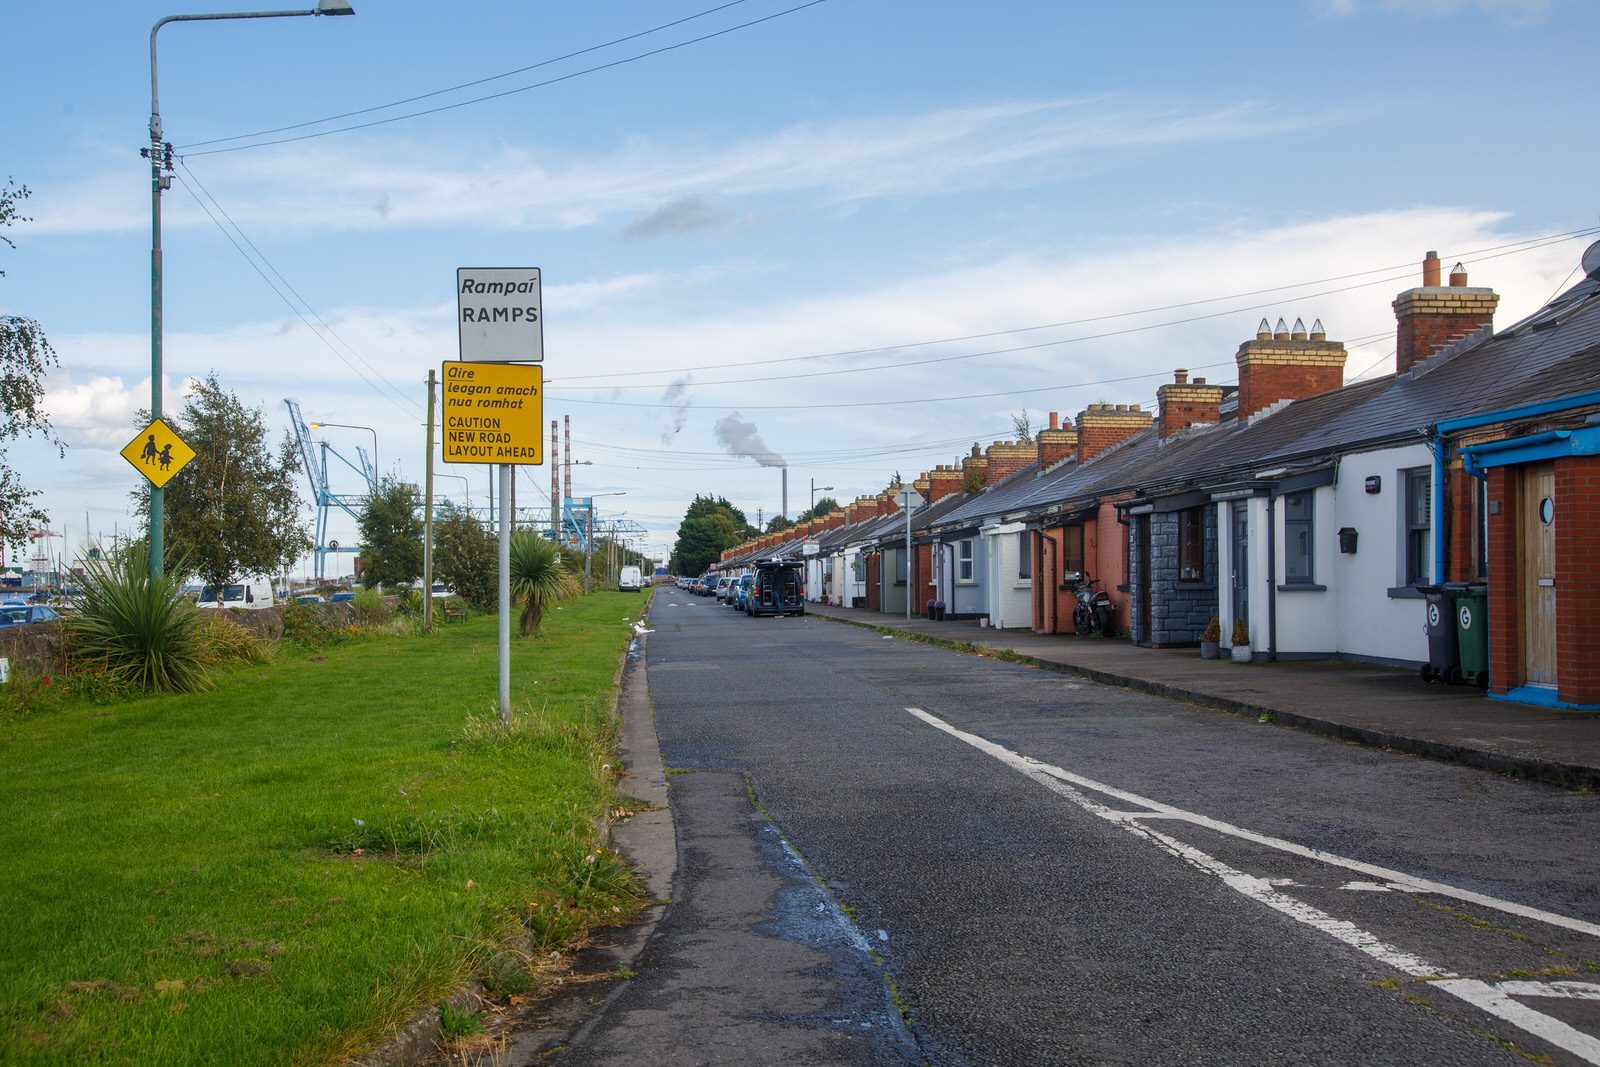 PIGEON HOUSE ROAD IN RINGSEND [IS A COMPLEX OF STREETS RATHER THAN A SINGLE STREET] 004